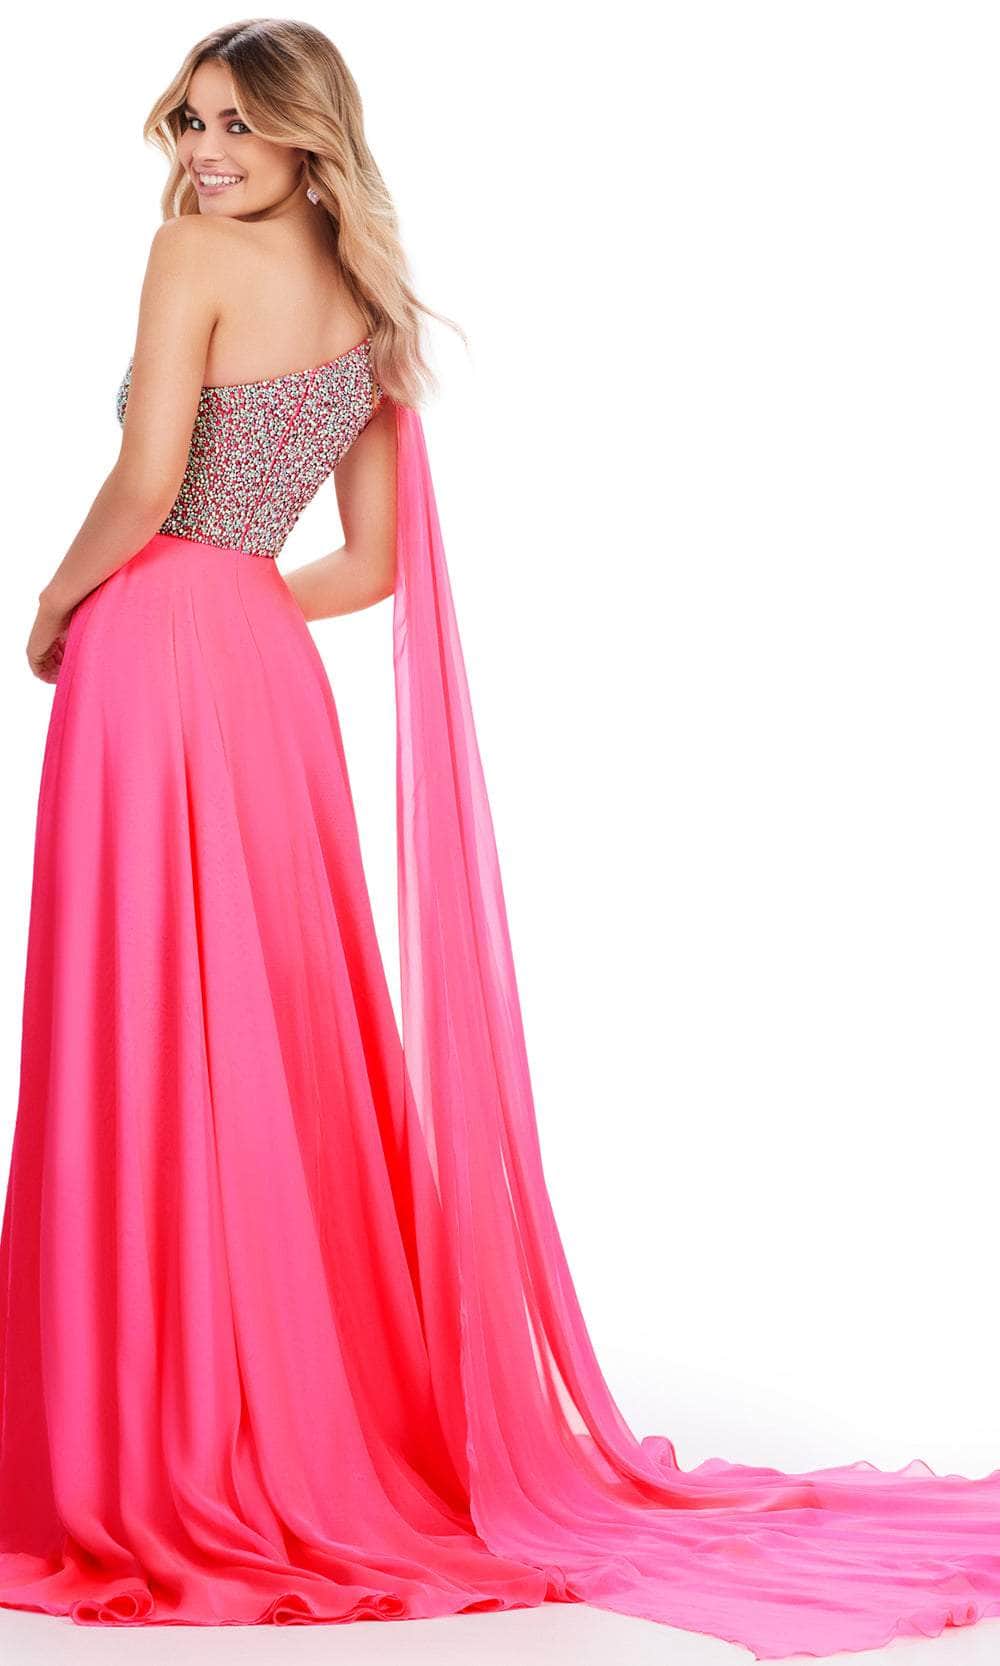 Ashley Lauren 11482 - Beaded Bustier Prom Gown Prom Dresses